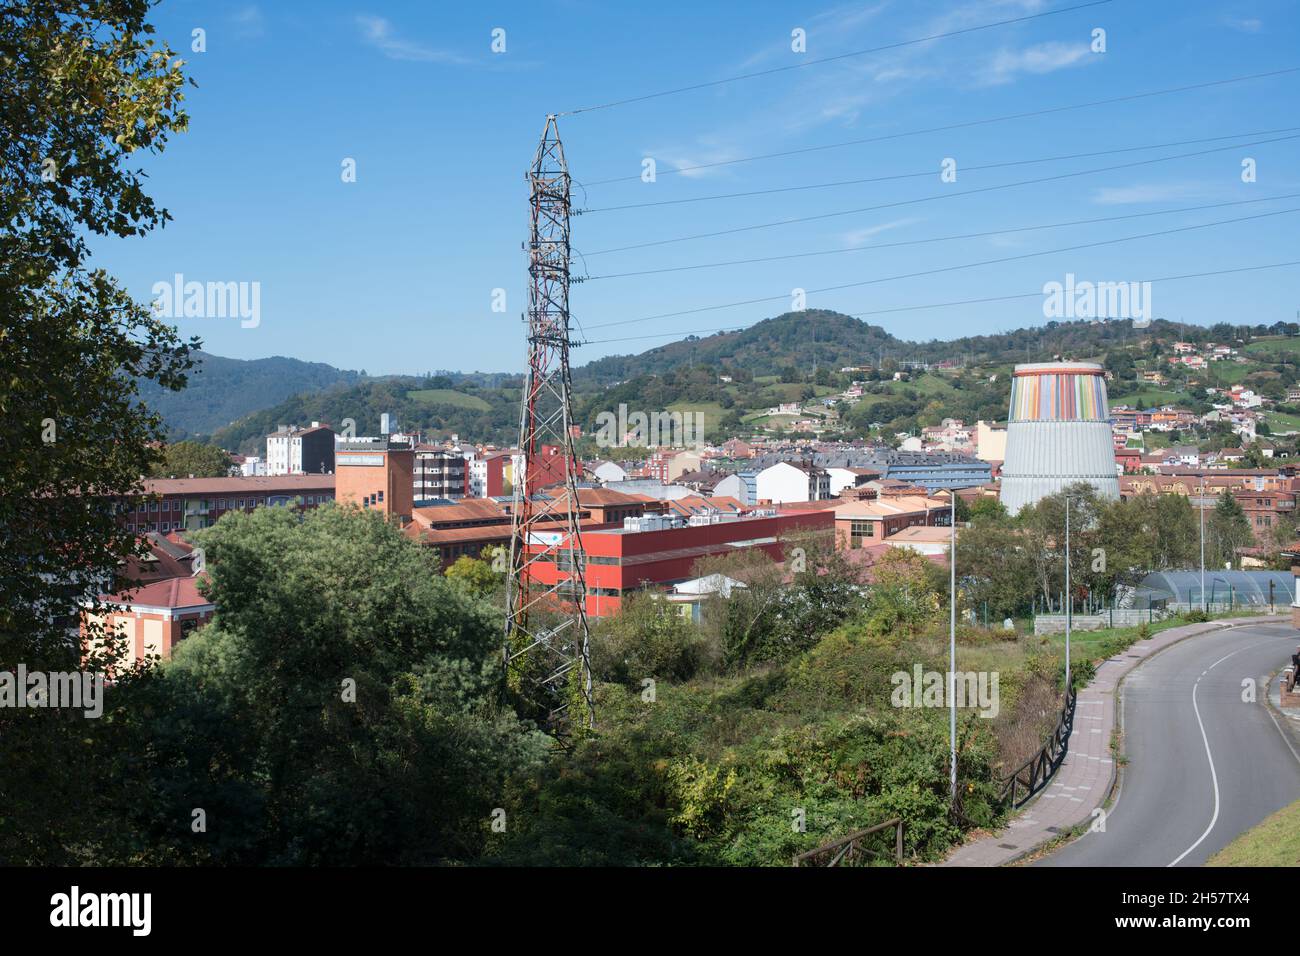 Aerial view of La Felguera, an asturian industrial town. The old industrial colorful tower is nowadays an important Museum, MUSI. Langreo, Asturias Stock Photo